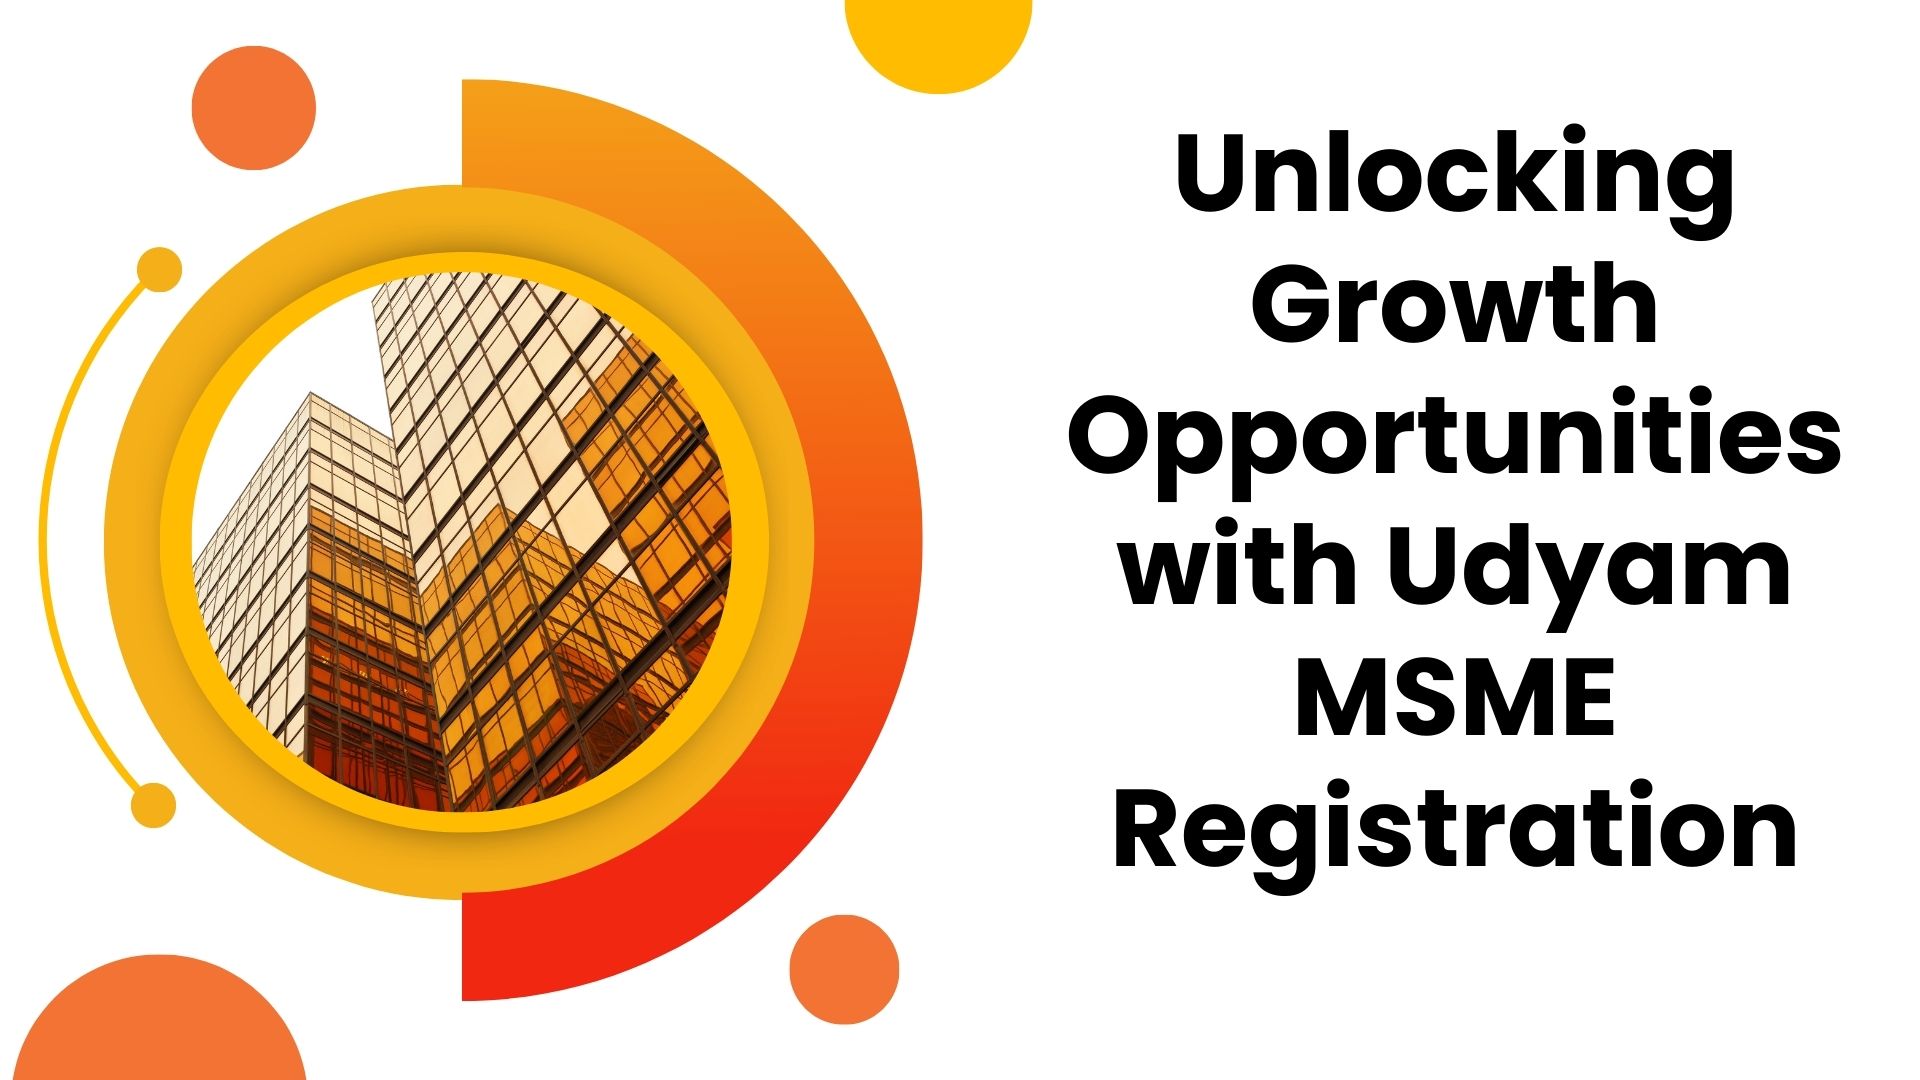 Unlocking Growth Opportunities with Udyam MSME Registration